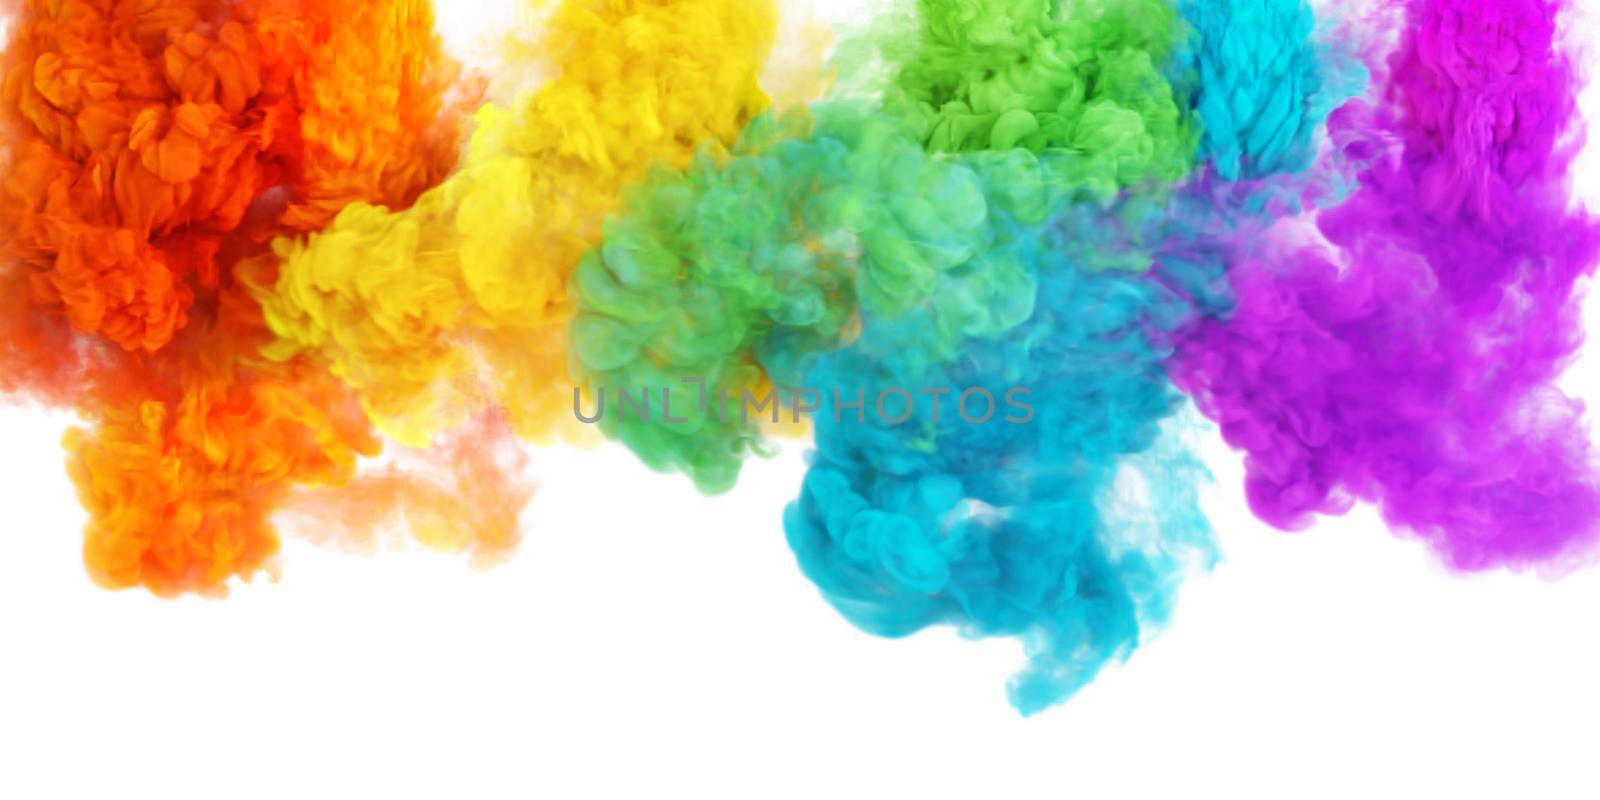 Fantastic rainbow color puffs of smoke or fog by Xeniasnowstorm